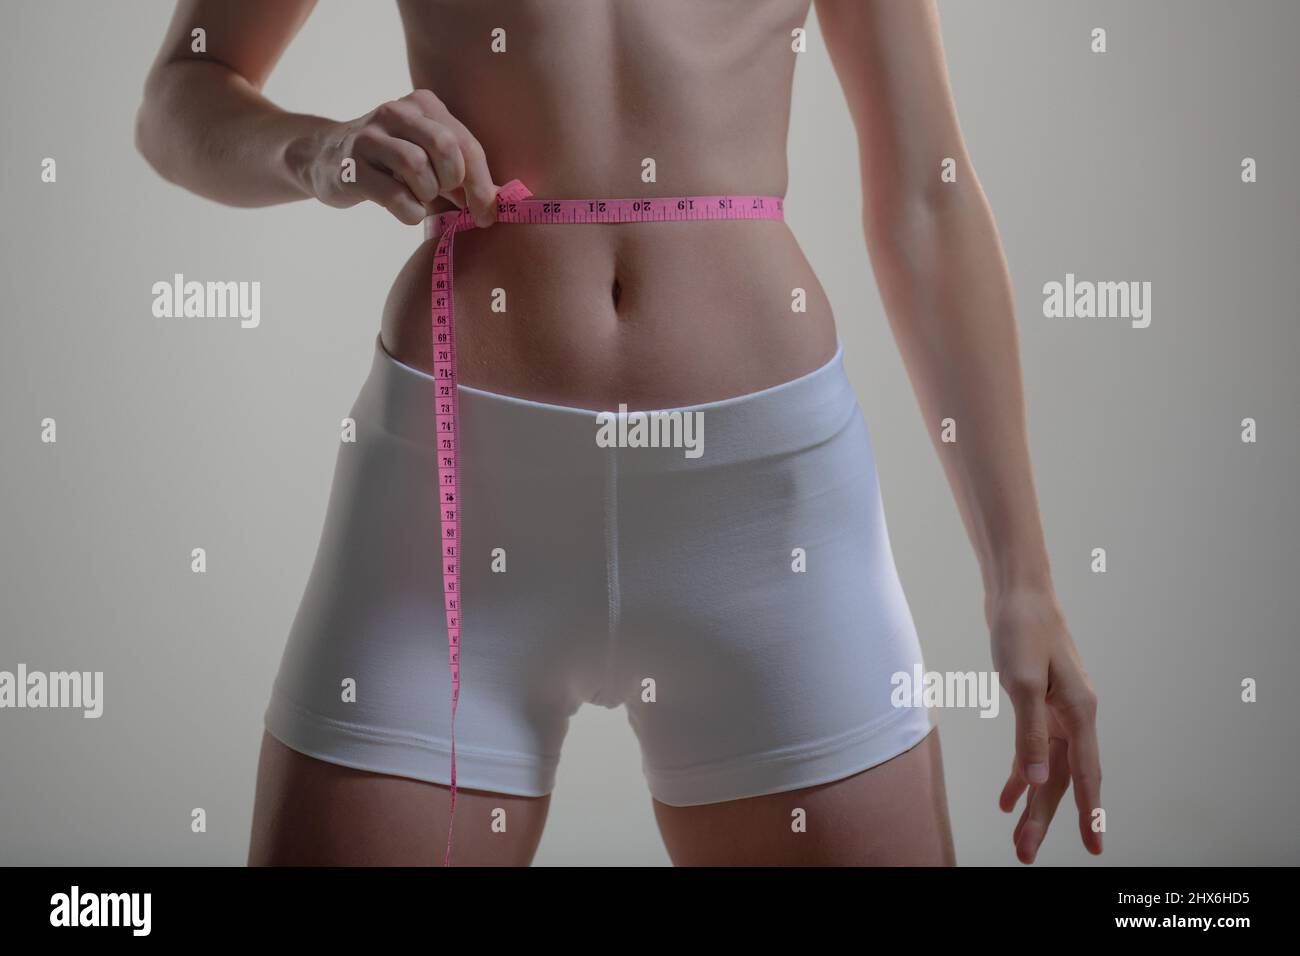 https://c8.alamy.com/comp/2HX6HD5/slim-girl-holding-a-centimeter-around-the-waist-line-slim-young-woman-measuring-her-waist-with-a-tape-measure-weight-los-2HX6HD5.jpg